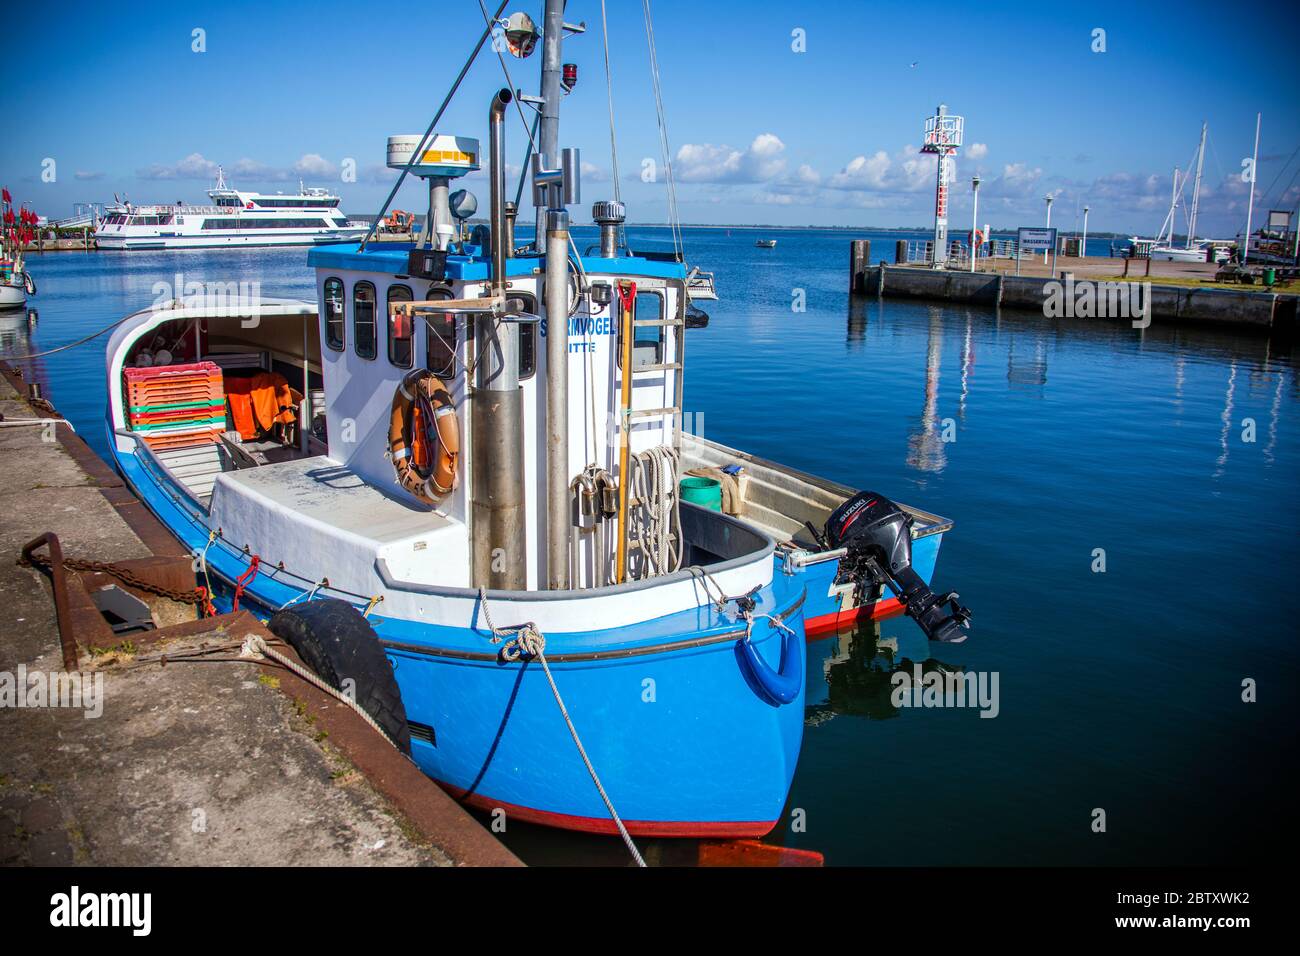 Vitte, Germany. 25th May, 2020. Fishing cutter in the harbour on the Baltic Sea island of Hiddensee. Credit: Jens Büttner/dpa-Zentralbild/ZB/dpa/Alamy Live News Stock Photo